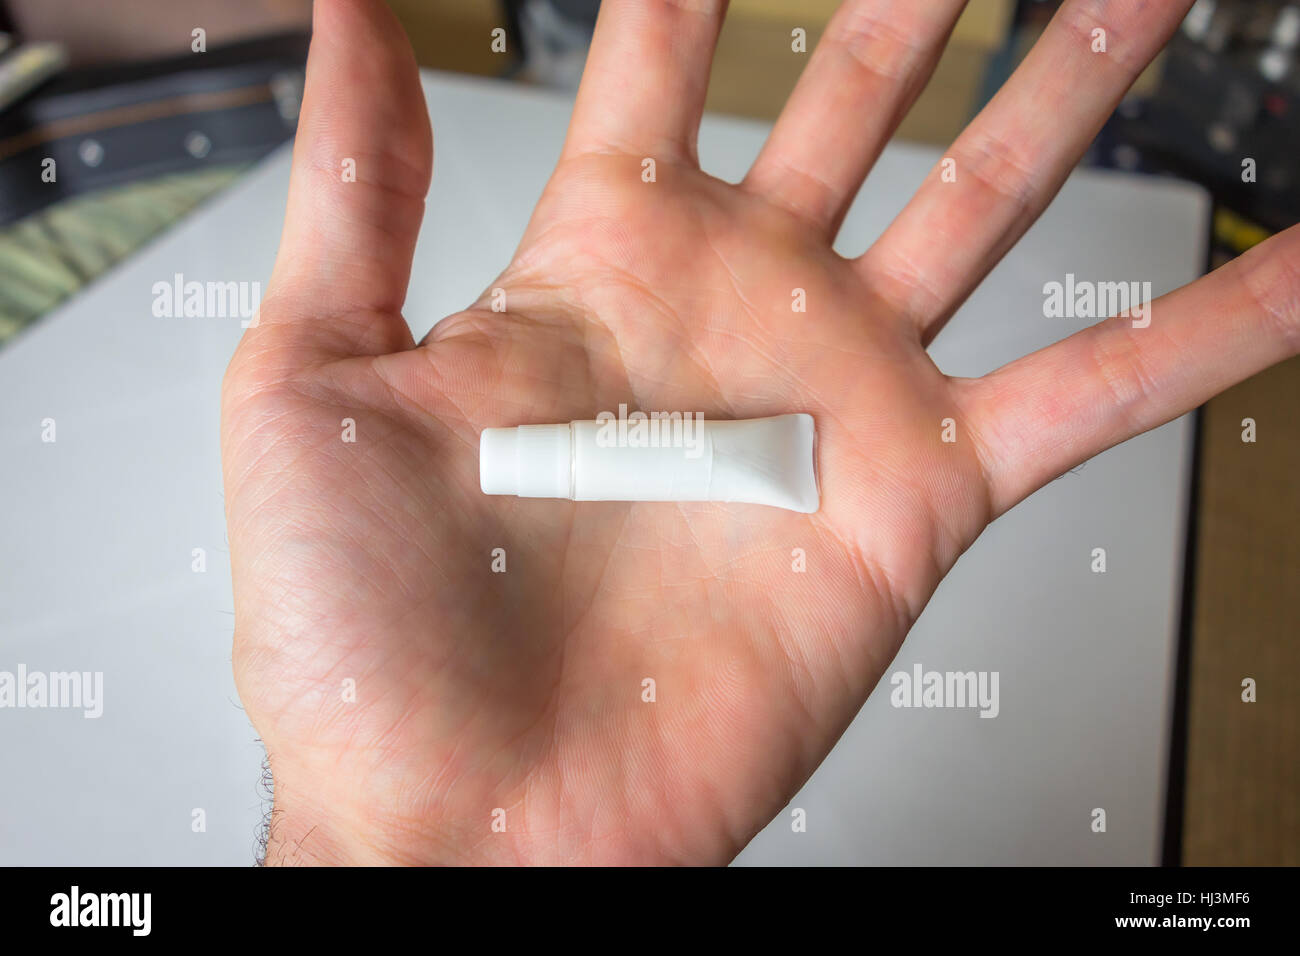 A tiny, unlabeled tube held in the palm of a hand. Stock Photo